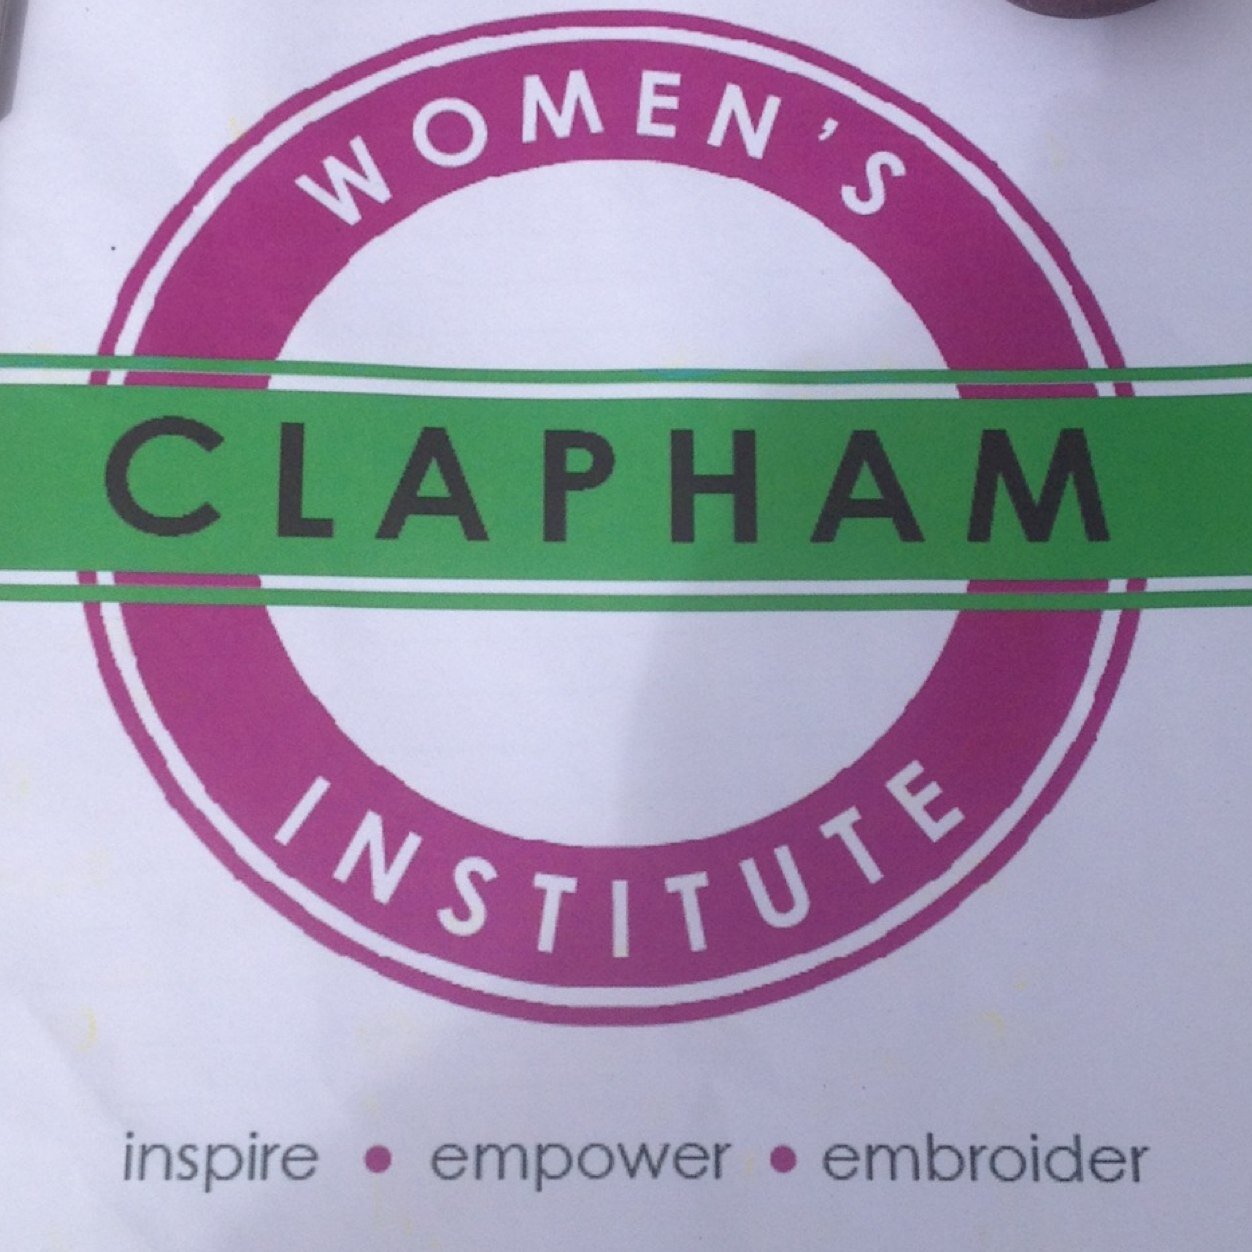 Clapham Women's Institute meets 2nd Tuesday of the month, 7pm @StudioVoltaire All women welcome, £4 non-mems. claphamwi@gmail.com